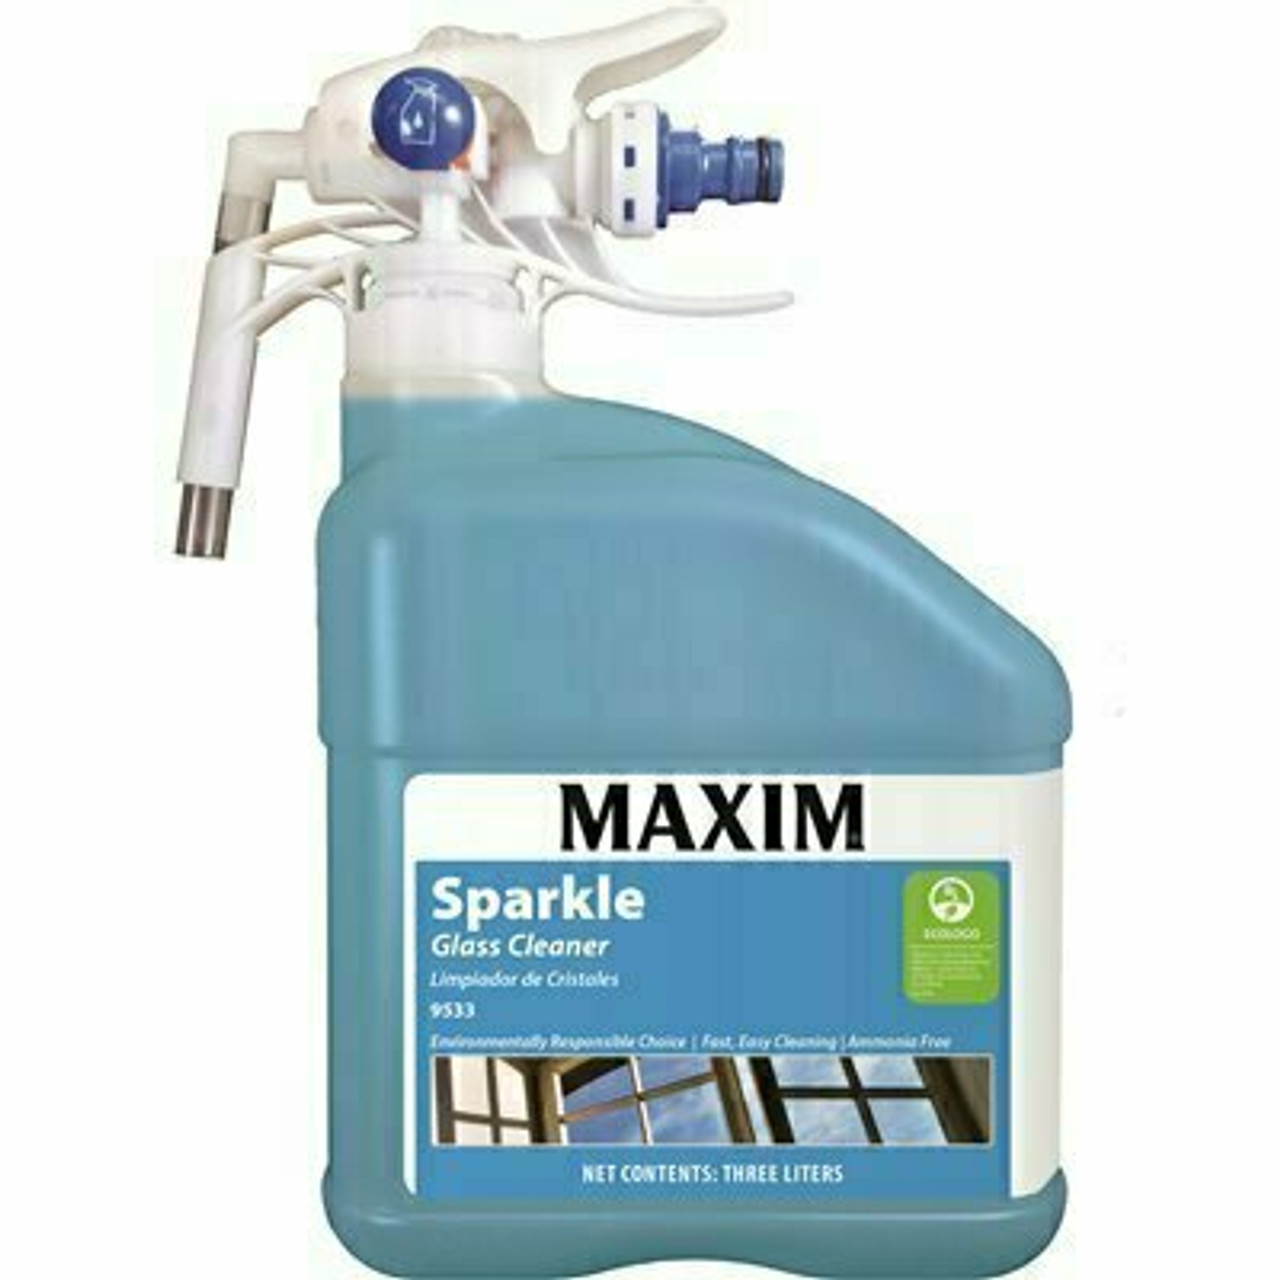 Maxim Sparkle 101.44 Oz. Glass Cleaner (2-Pack)